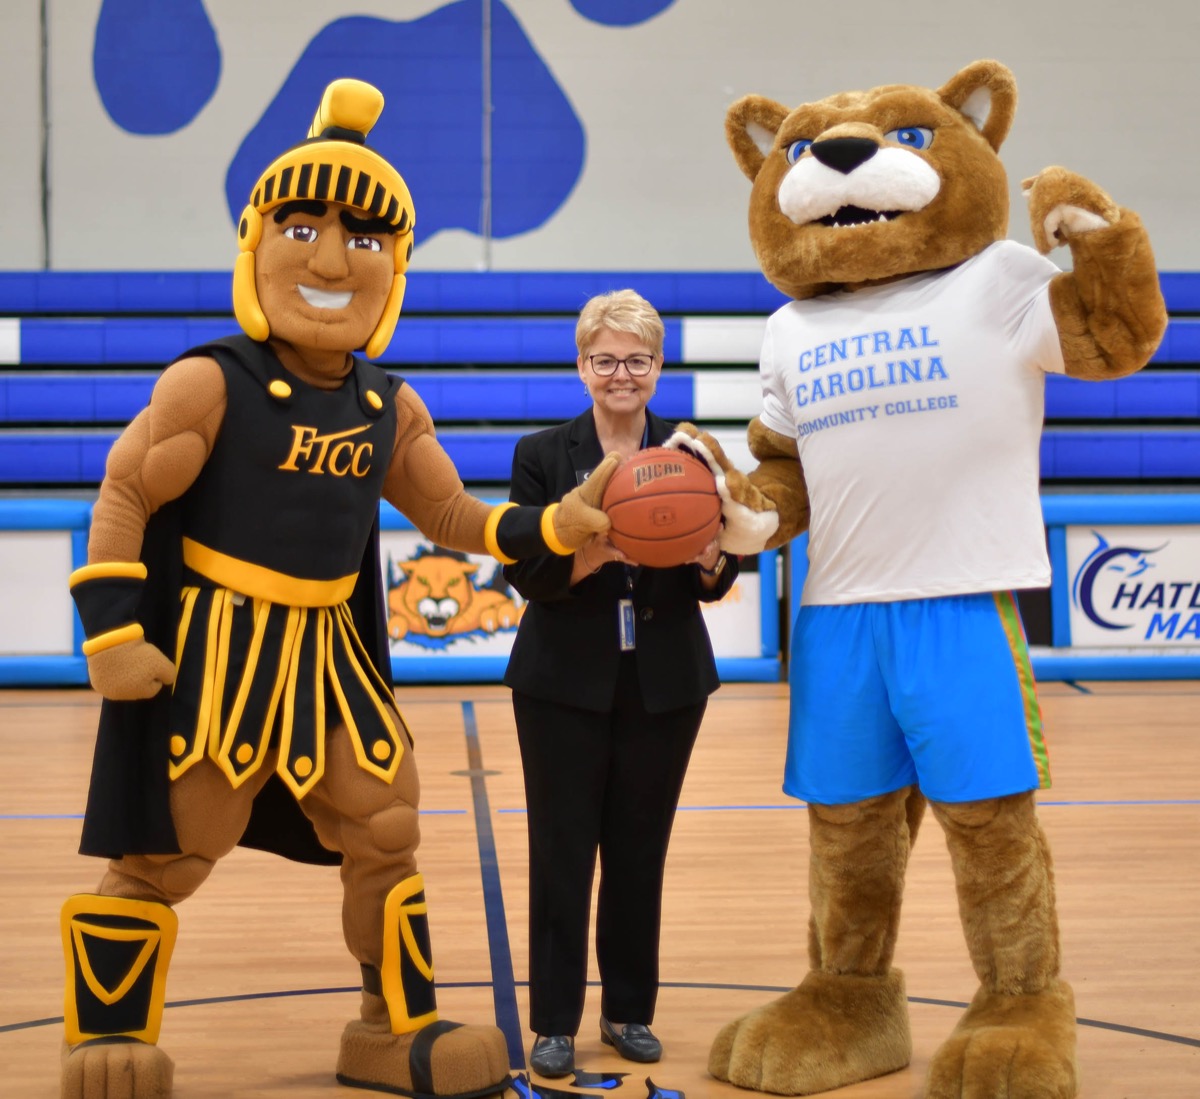 Read the full story, Cougar Classic basketball set for Dec. 29-30